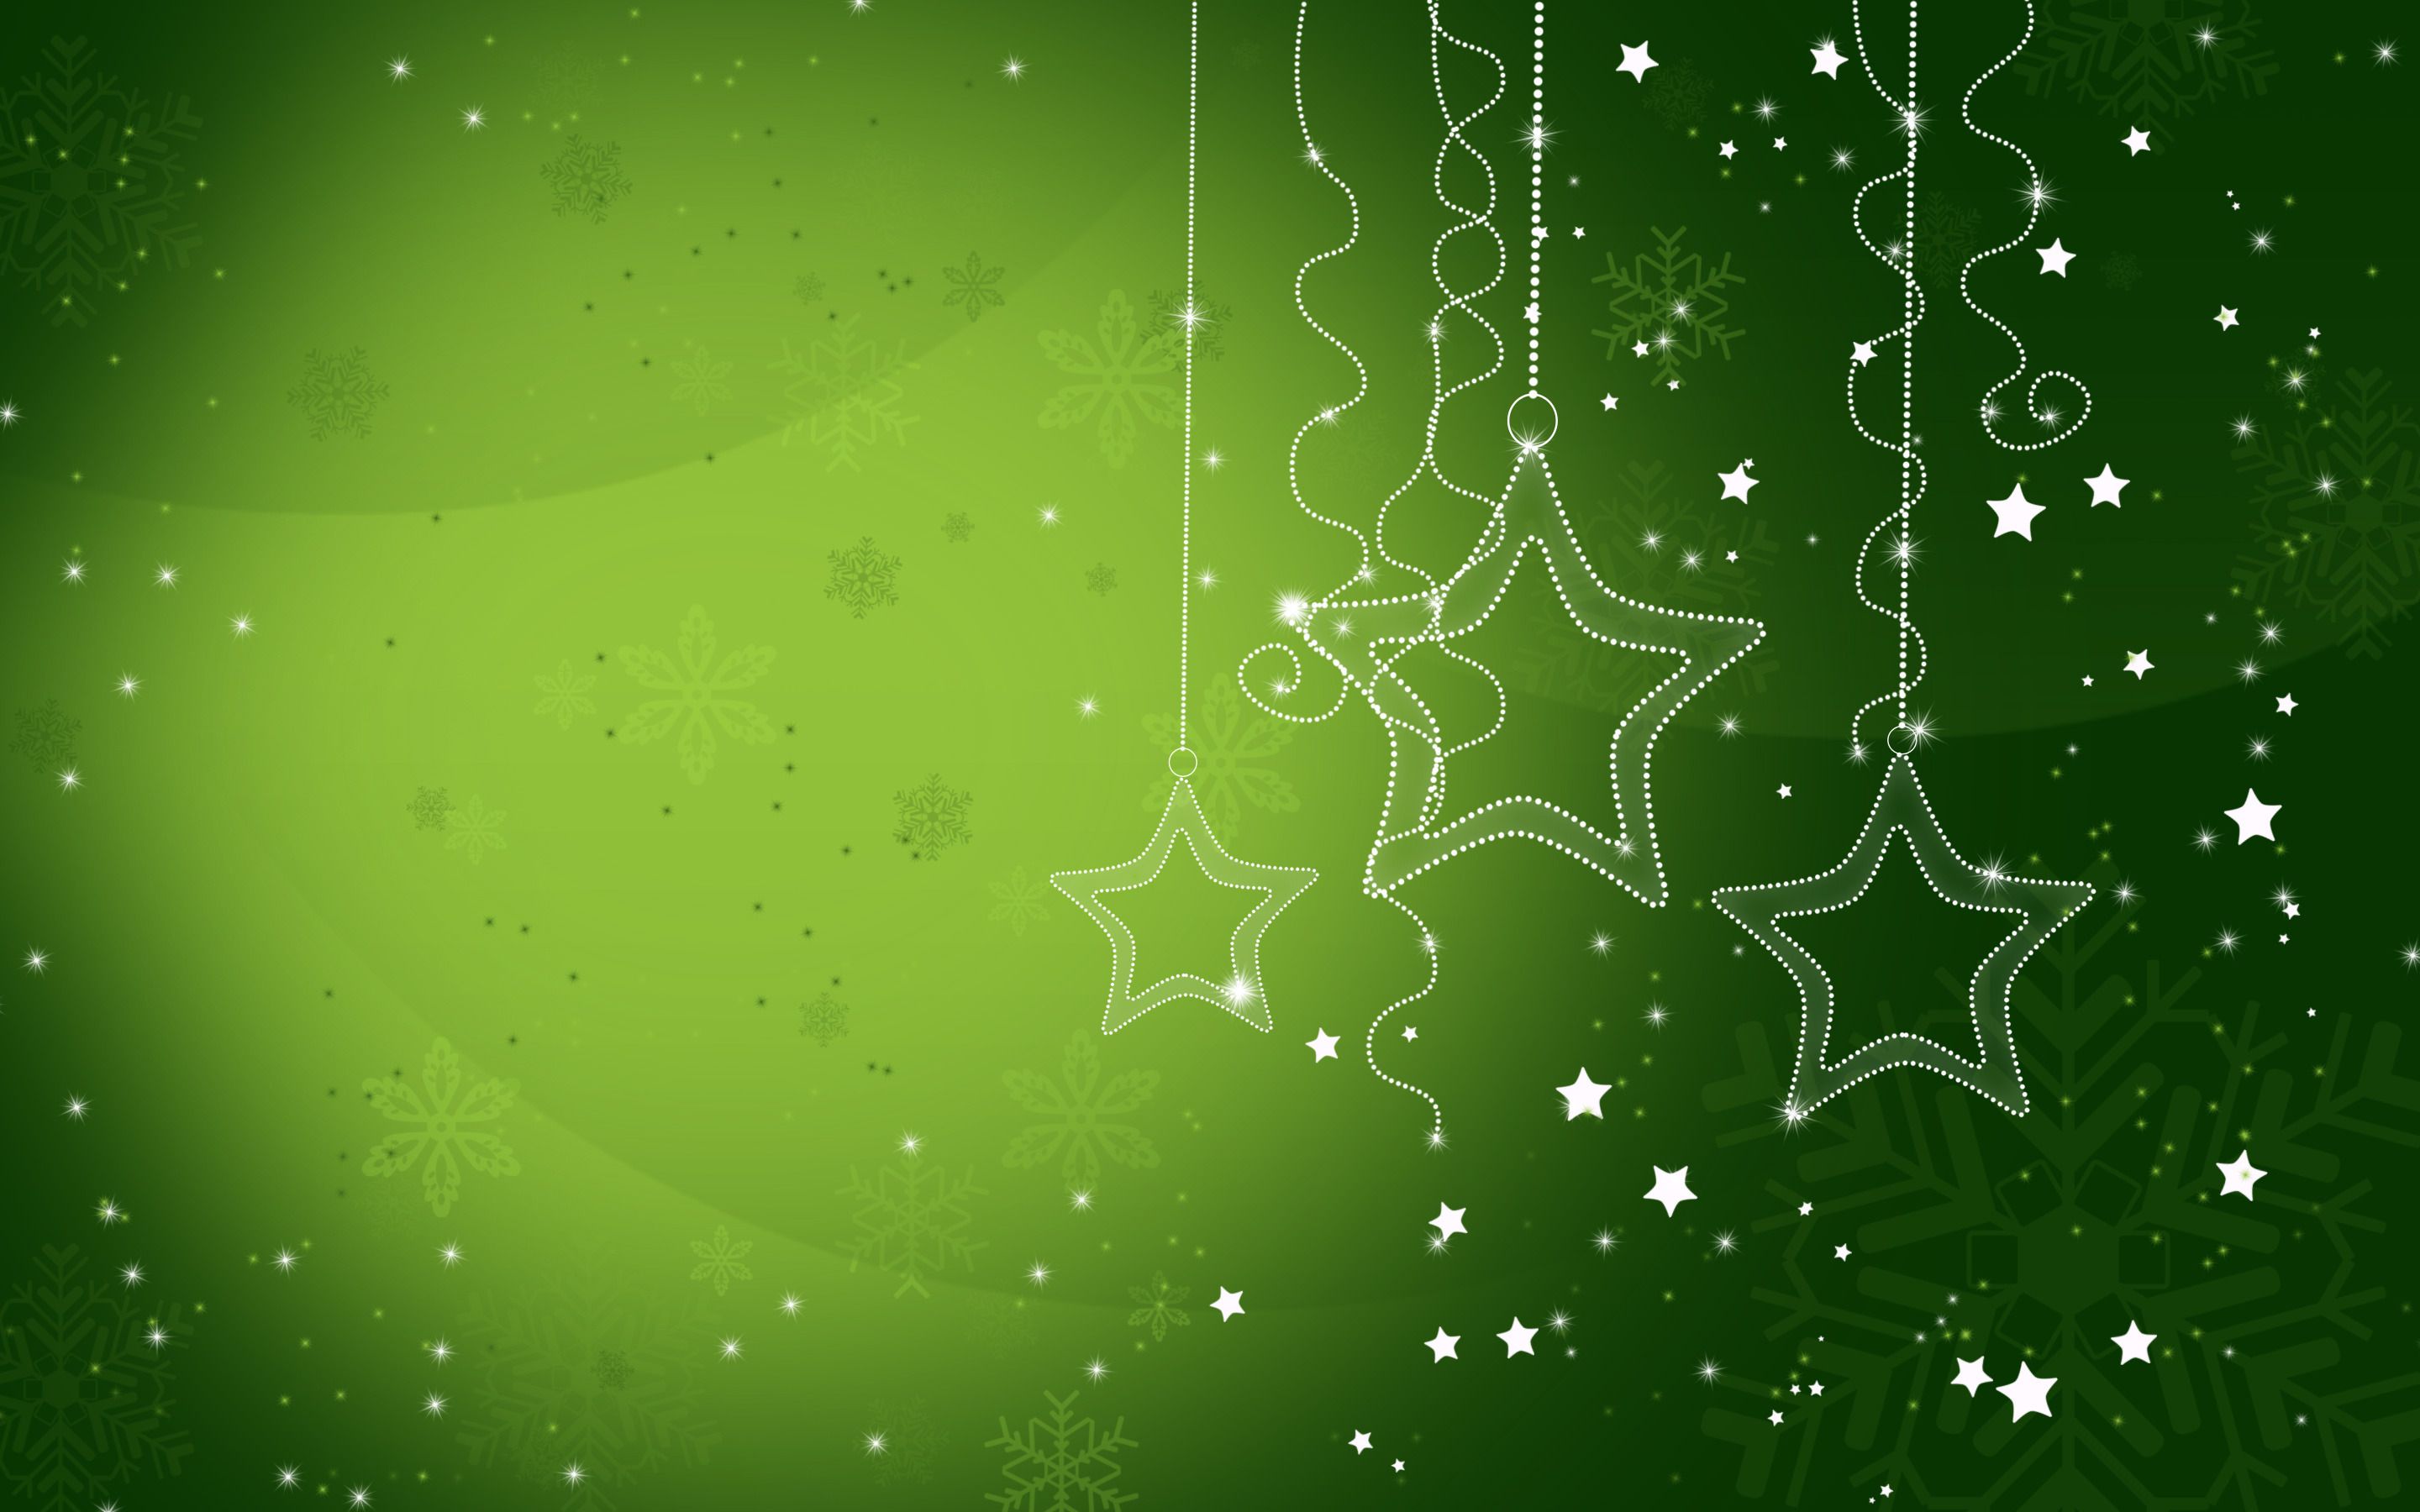 Free download Download Green Christmas Wallpaper 6502 2880x1800 px High [2880x1800] for your Desktop, Mobile & Tablet. Explore Holiday Wallpaper. Free Christmas Wallpaper, Thanksgiving Wallpaper, Christmas Desktop Free Holiday Wallpaper